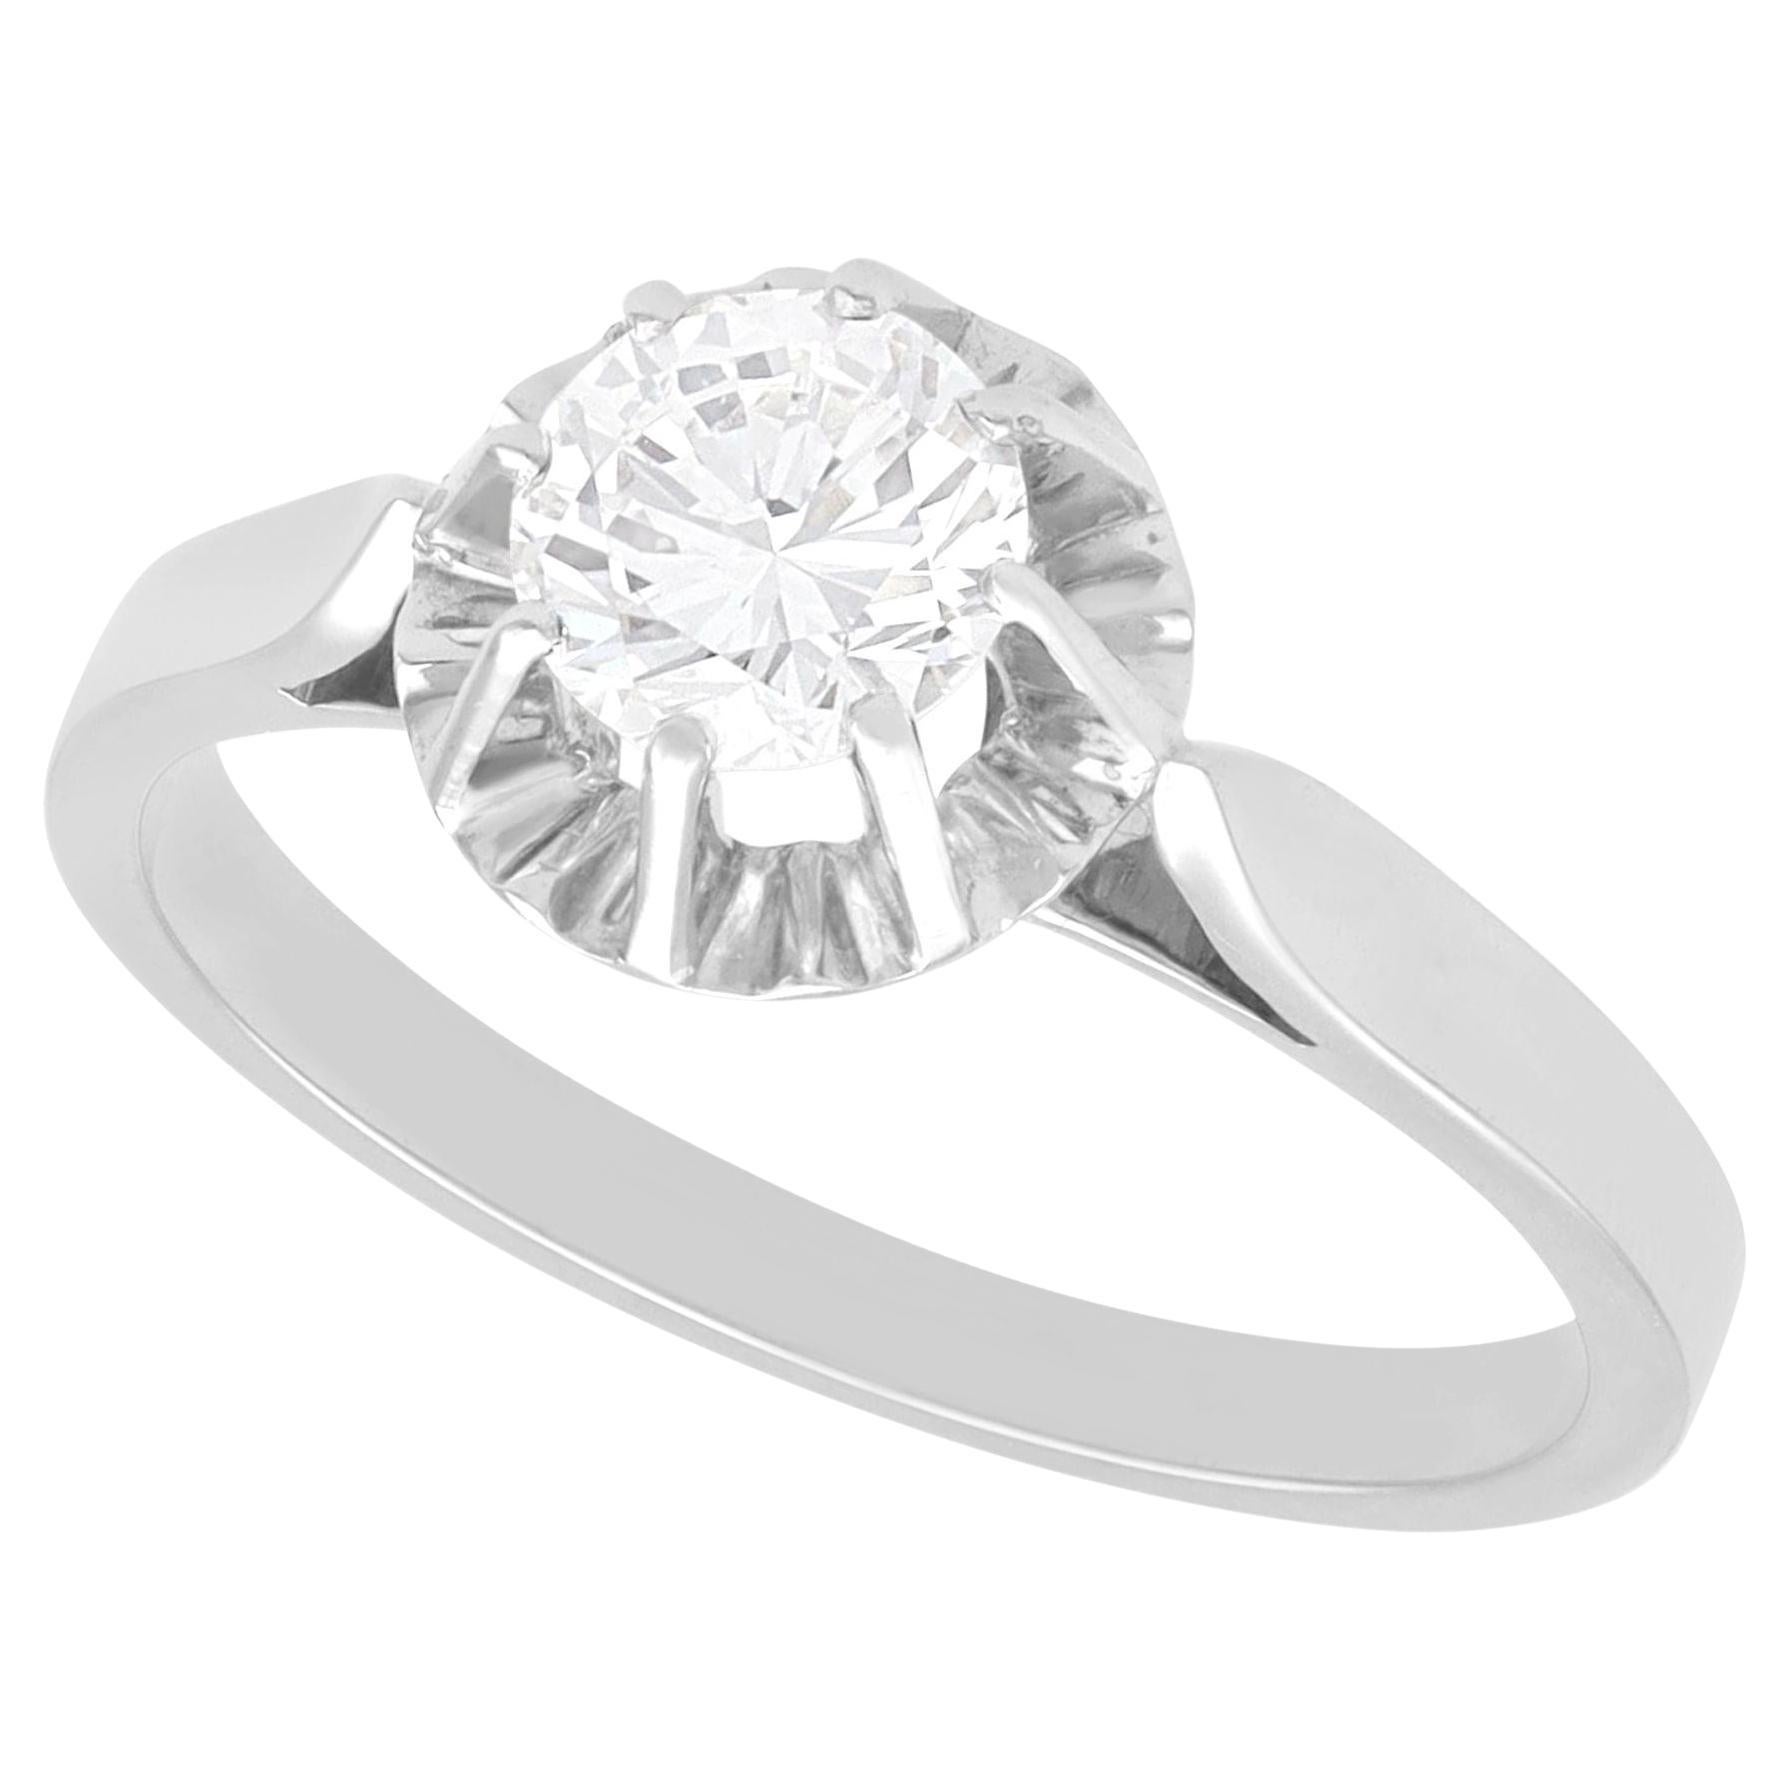 1930s Antique Diamond and White Gold Solitaire Engagement Ring